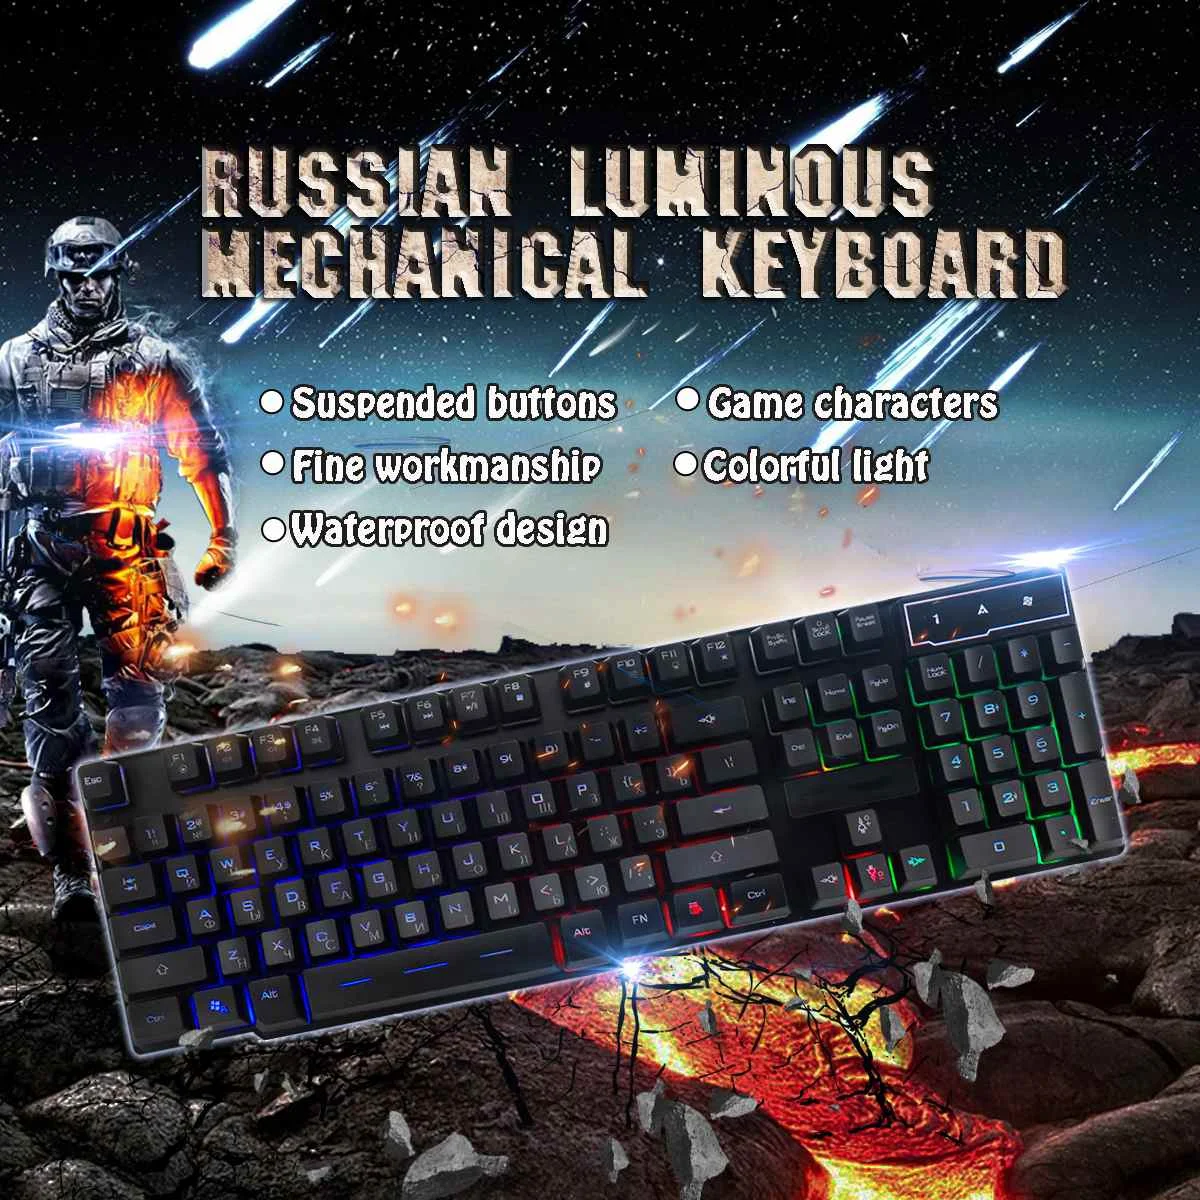 

S SKYEE Russian Keyboards 104 Keycaps Mechanical Gaming Wired USB Computer keyboard Backlight for Desktop Gamer PC Cool